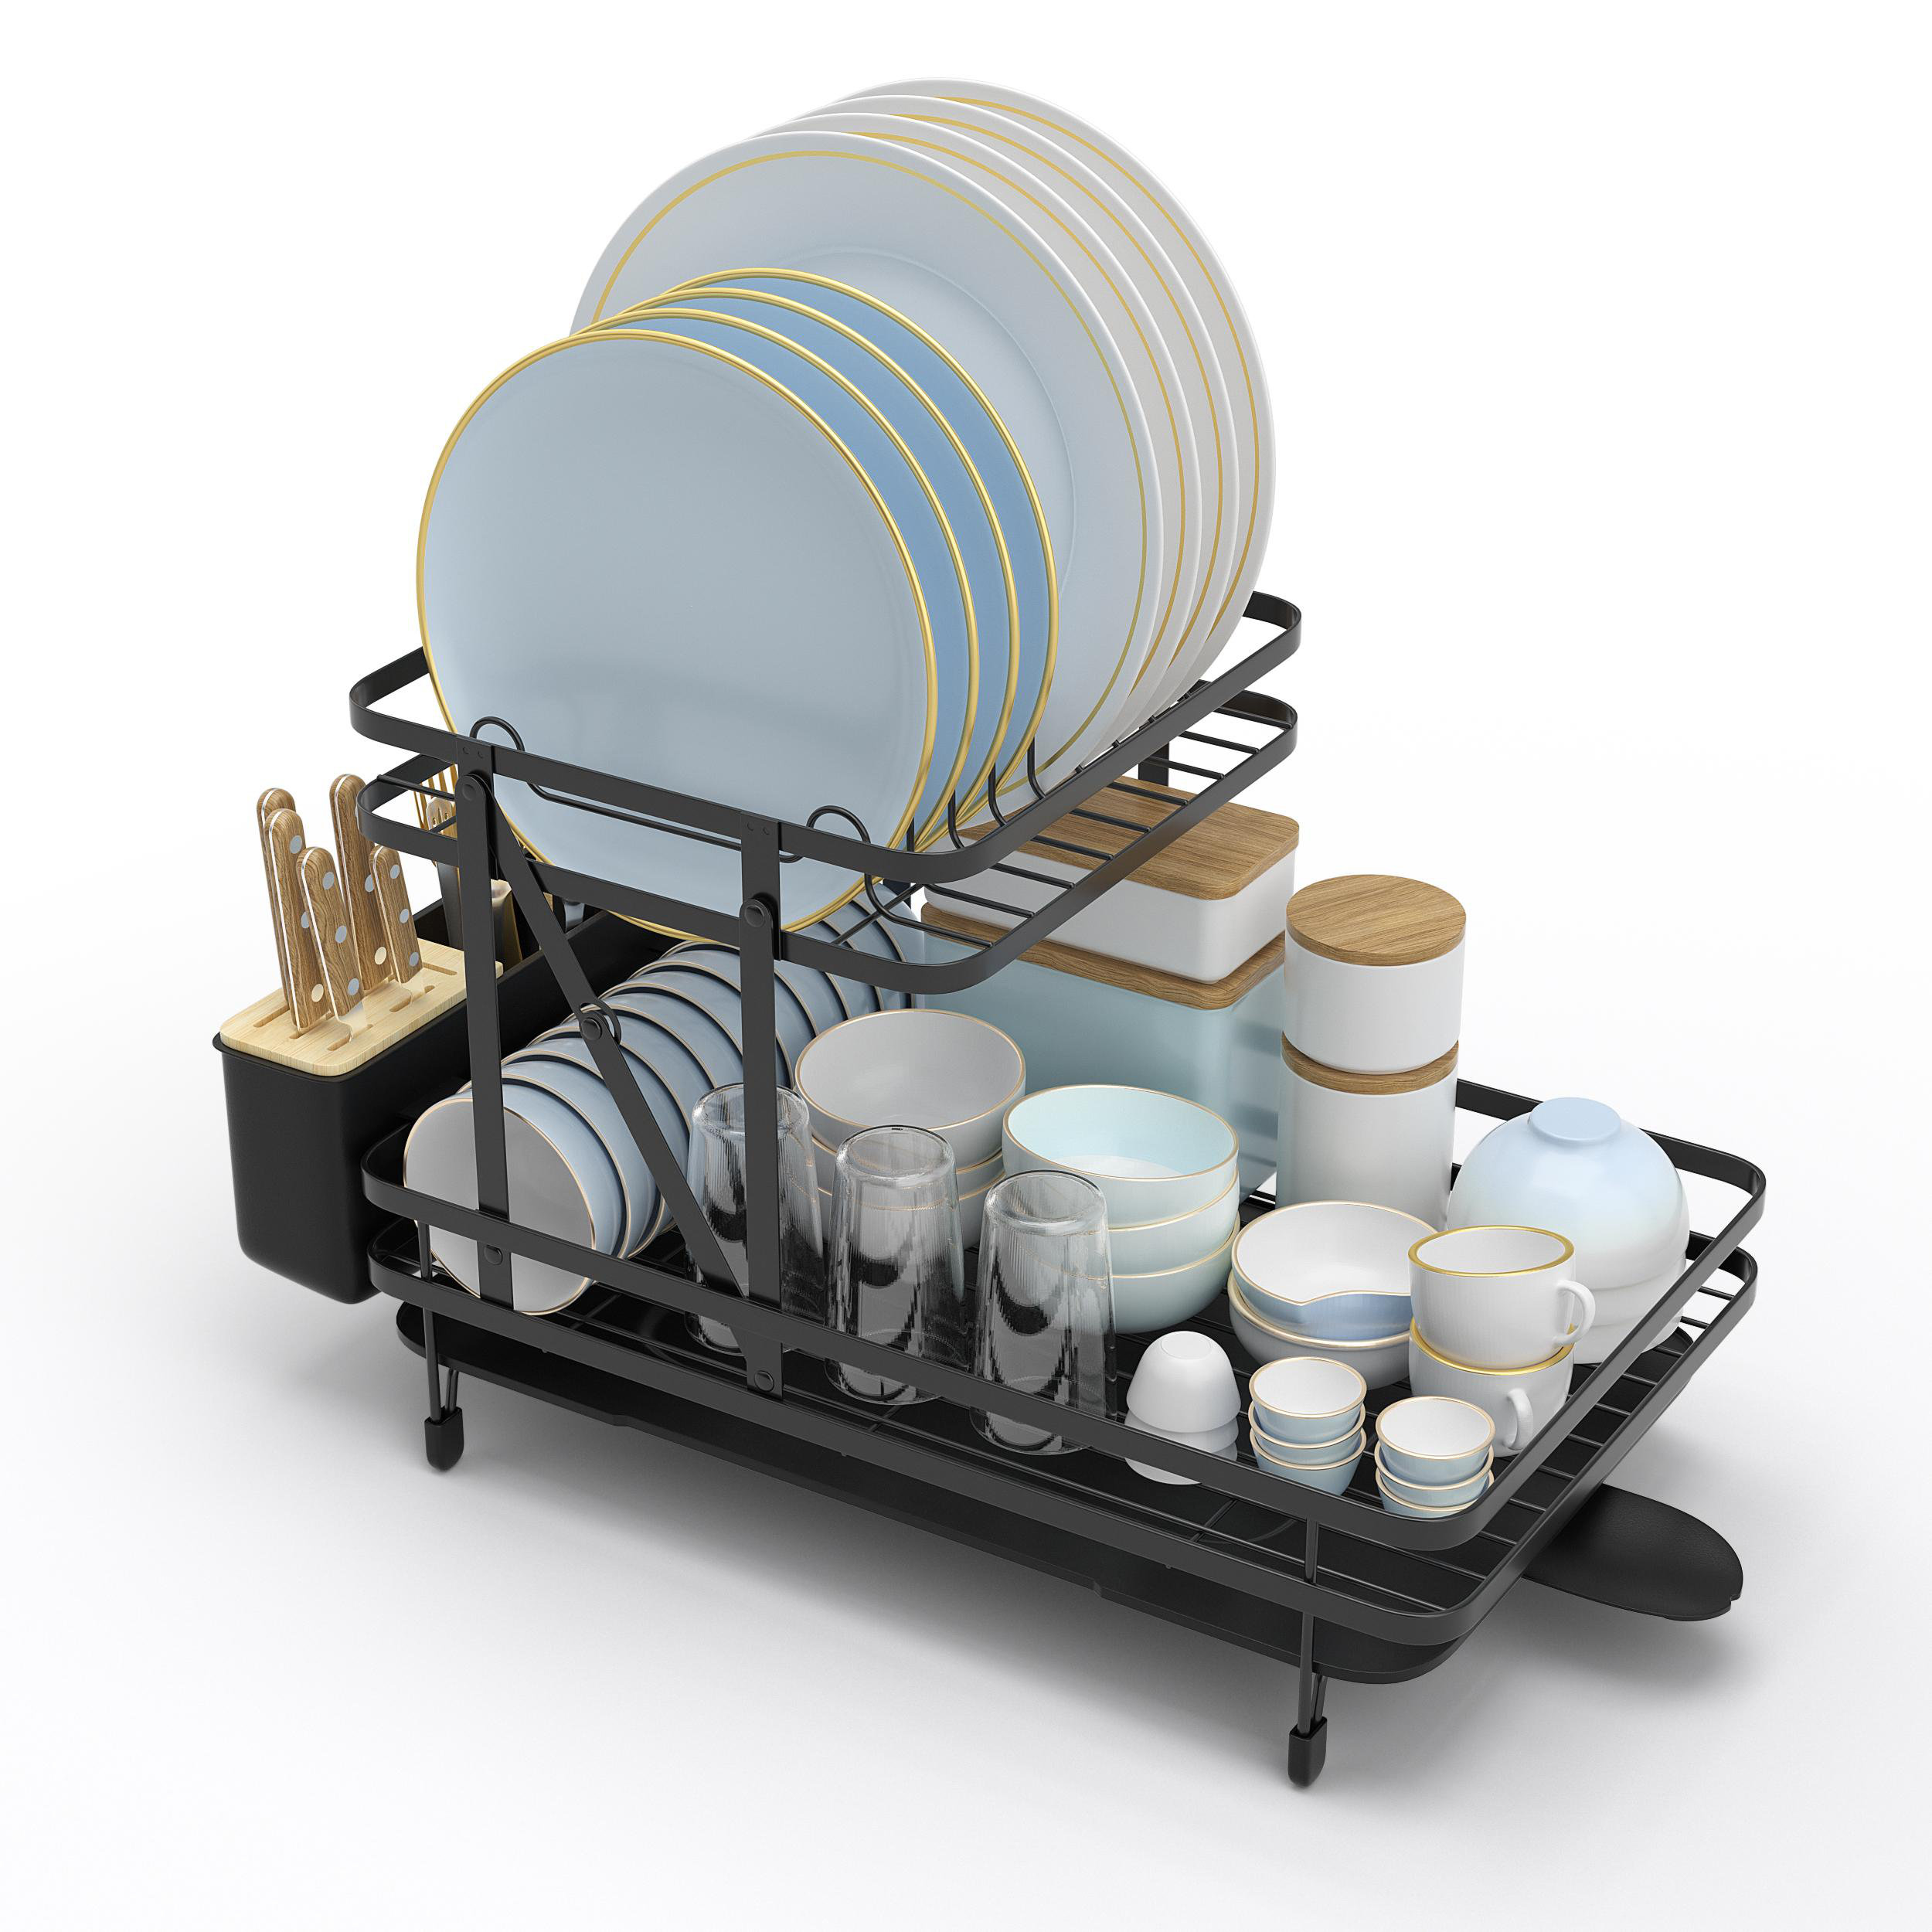 J&V TEXTILES Foldable Dish Drying Rack with Drainboard, Stainless Steel 2  Tier Dish Drainer Rack (Black)